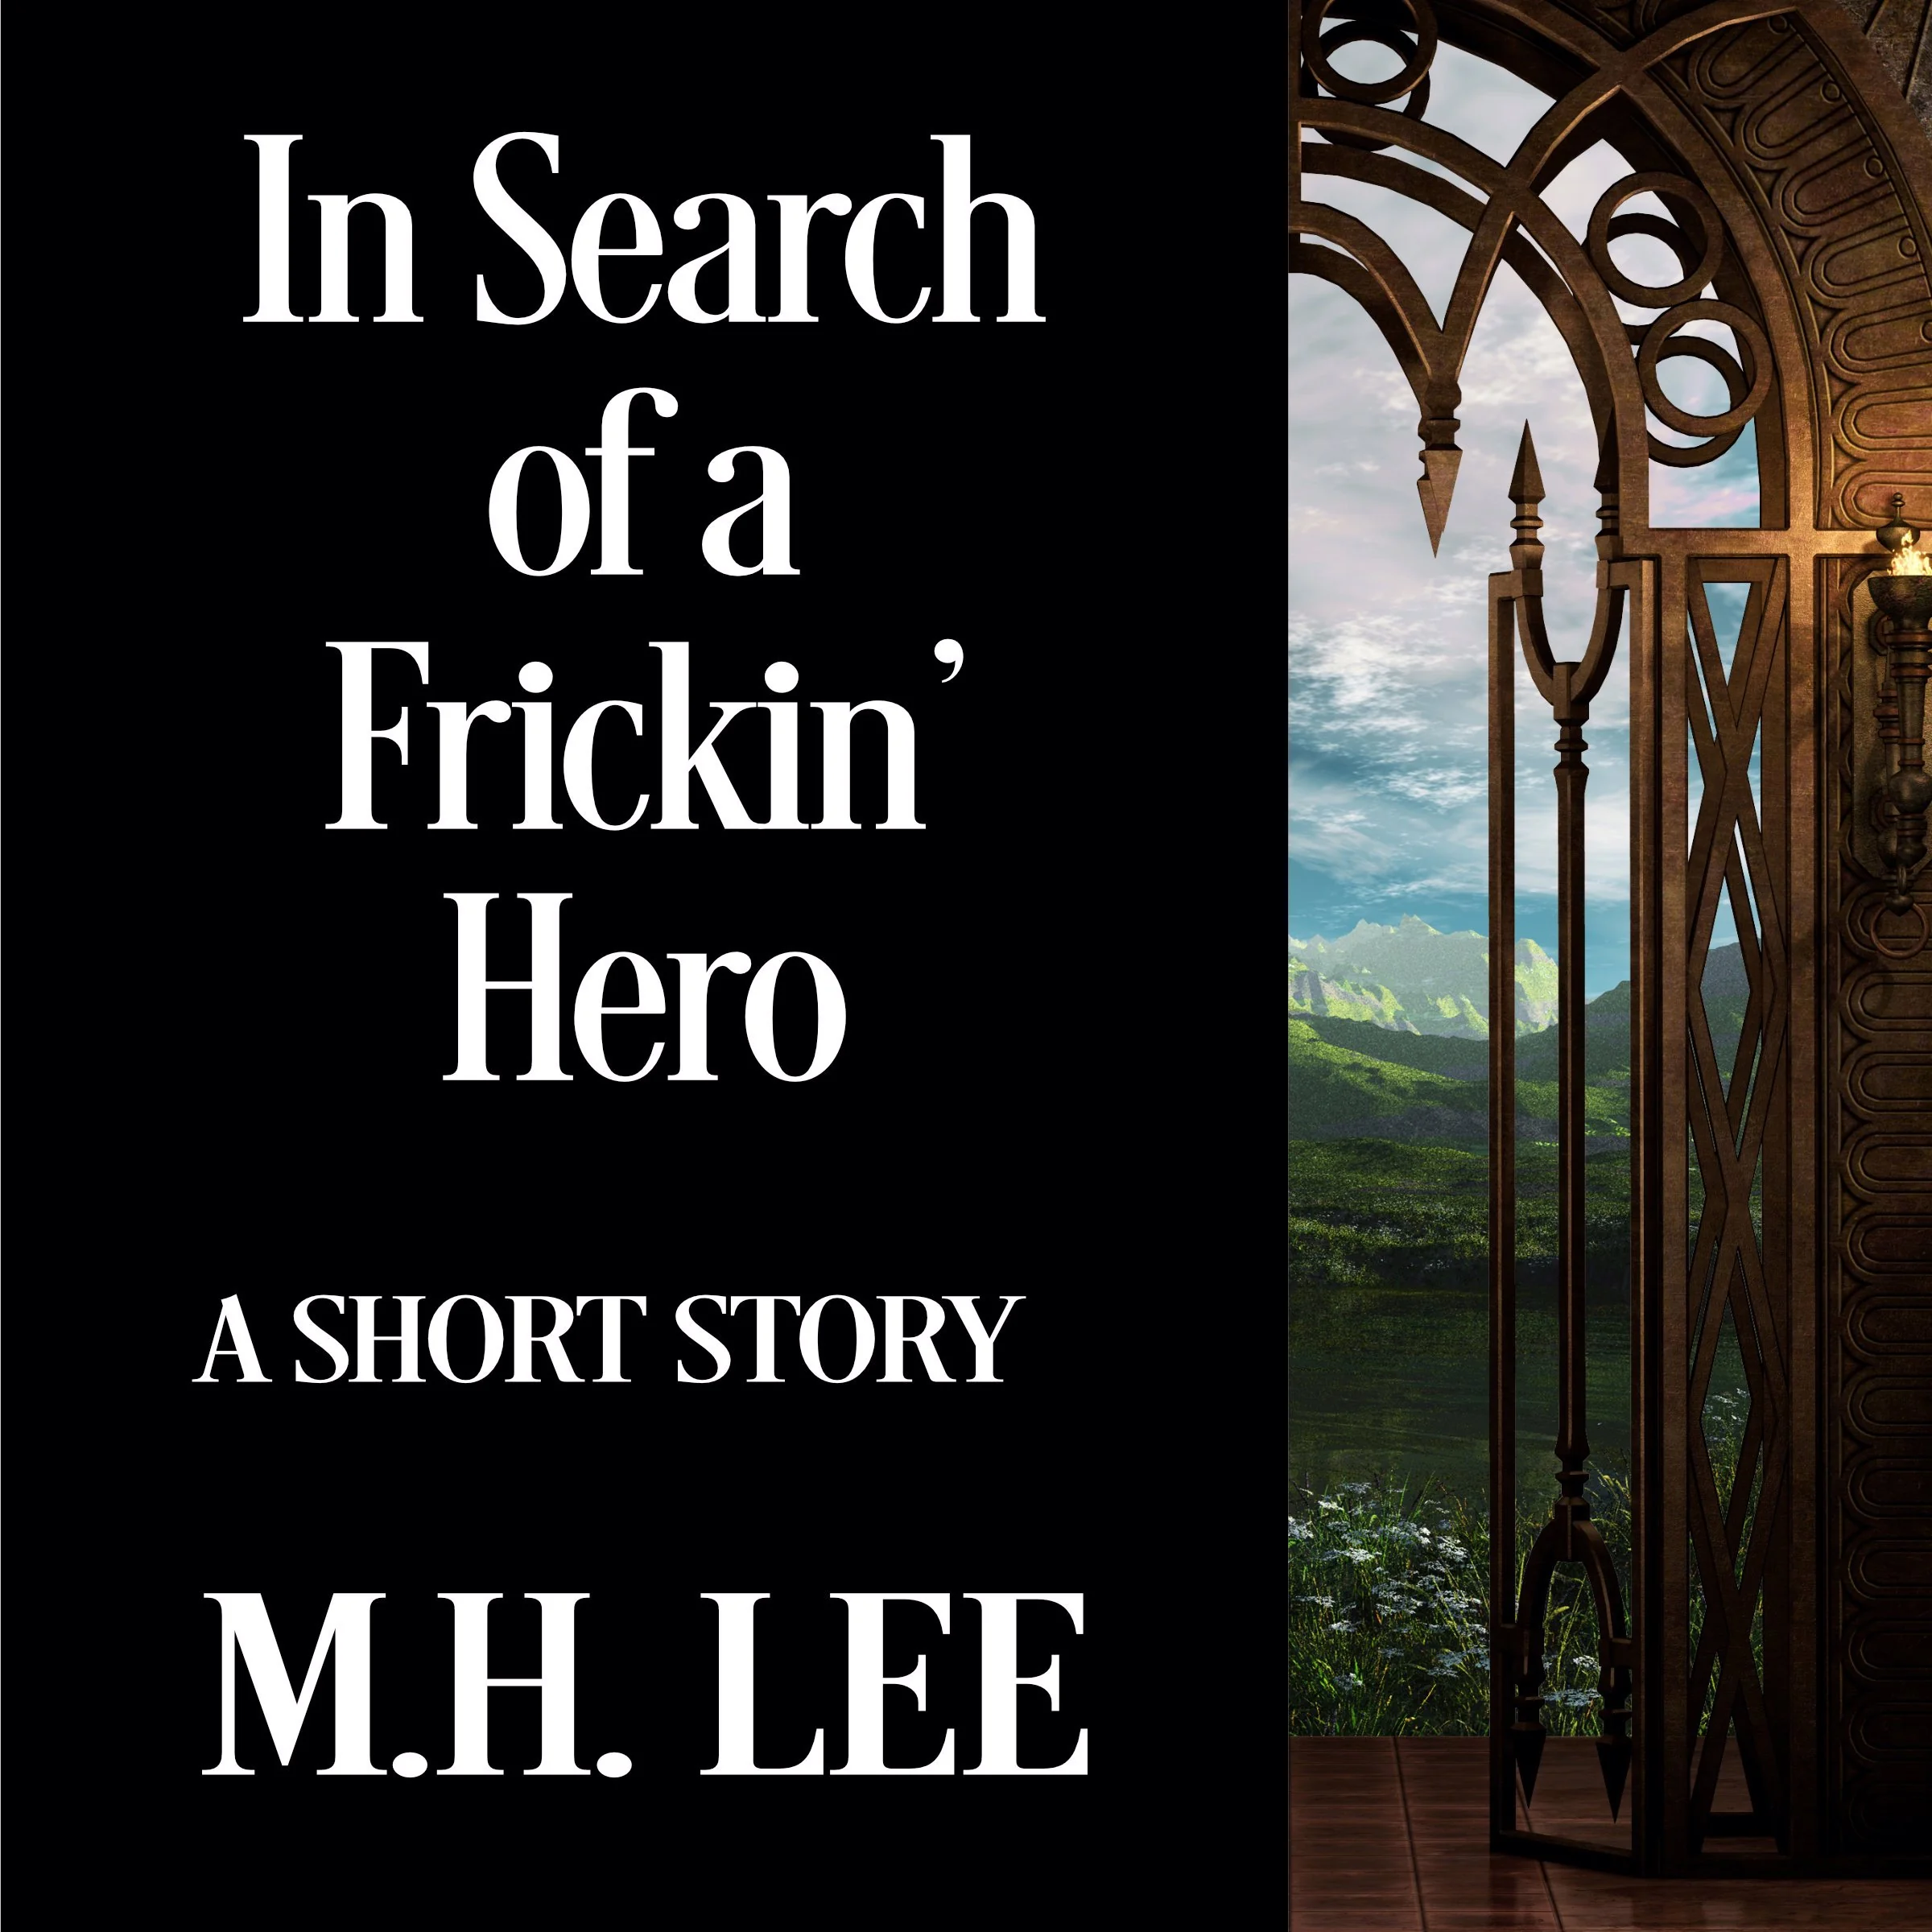 In Search of a Frickin' Hero Audiobook by M.H. Lee